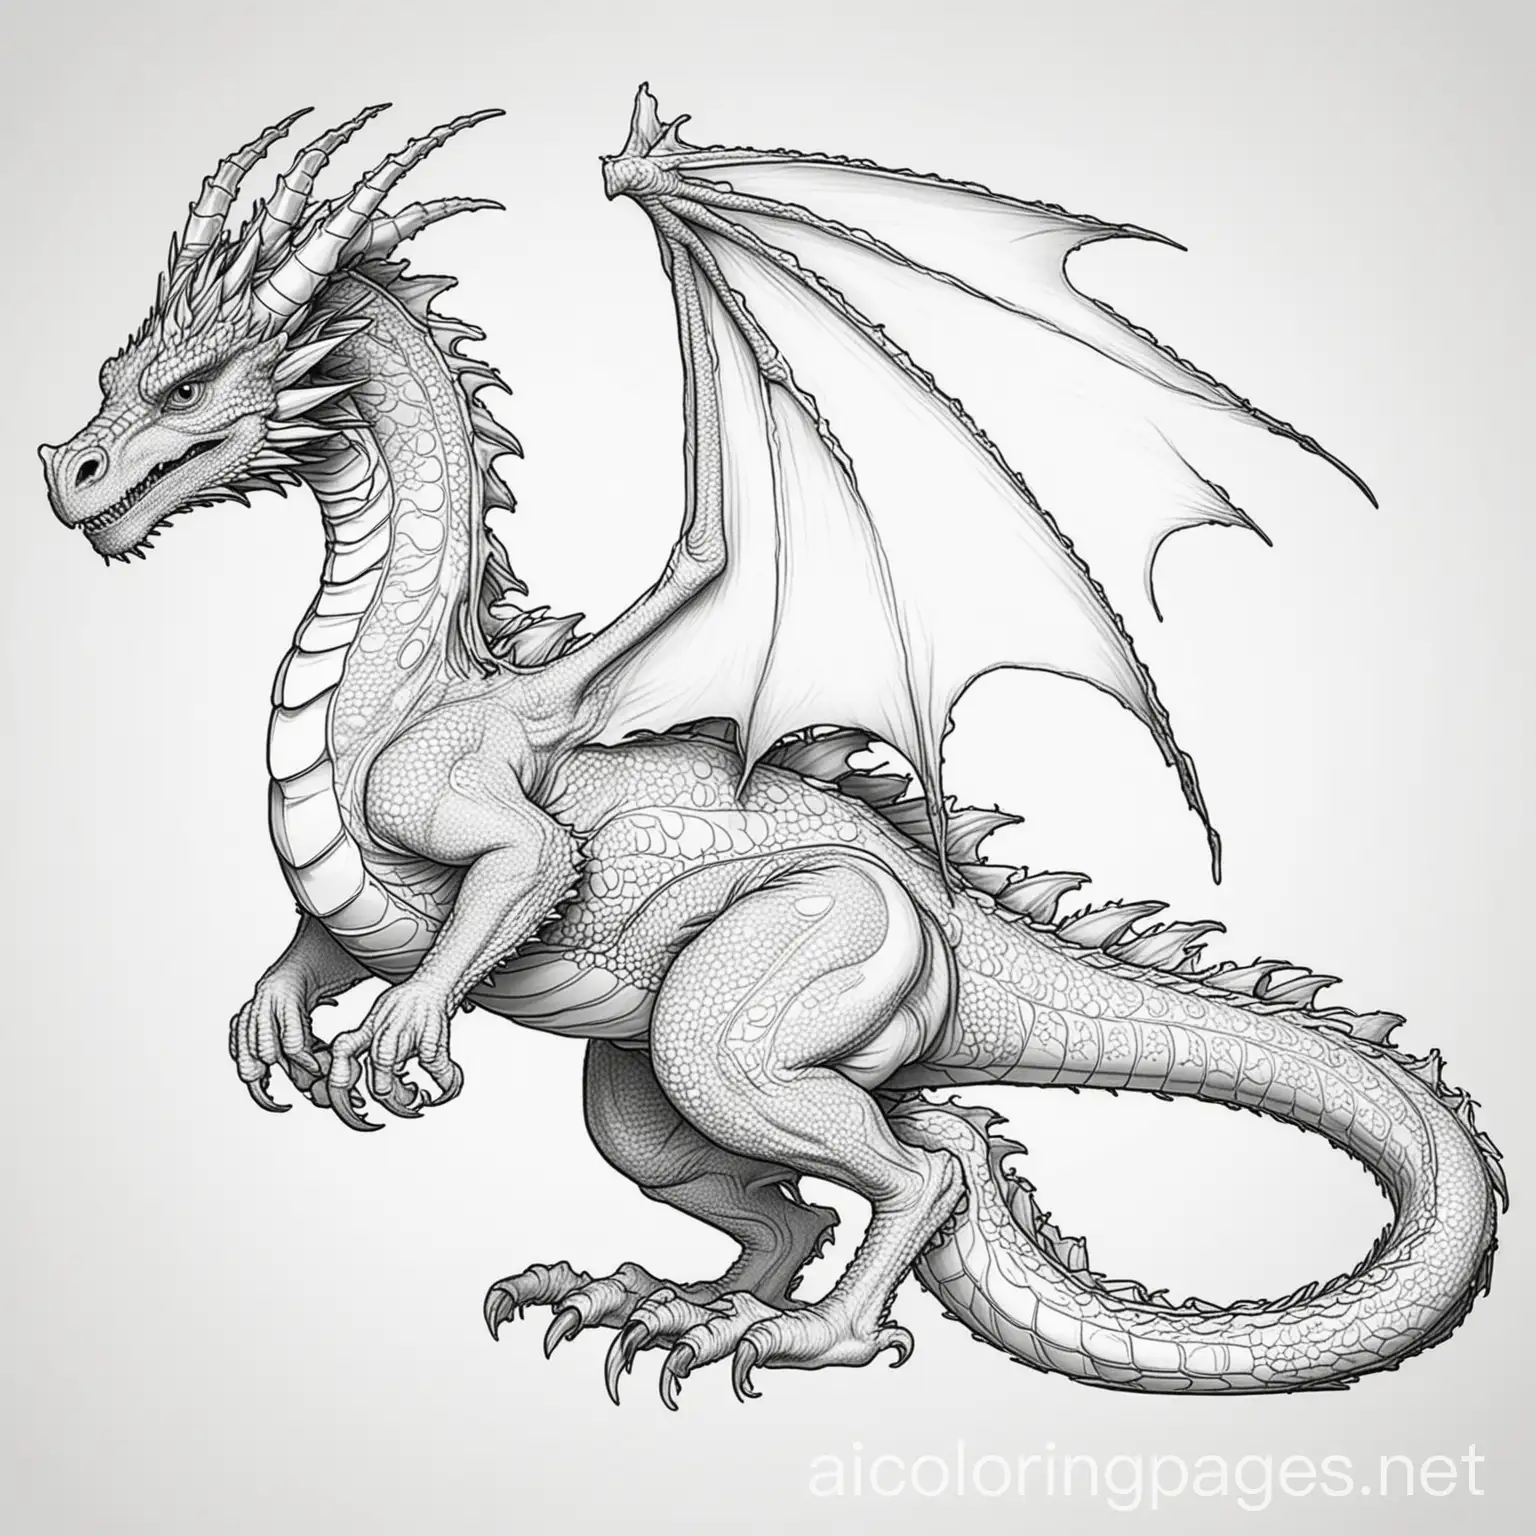 A large western dragon, Coloring Page, black and white, line art, white background, Simplicity, Ample White Space. The background of the coloring page is plain white to make it easy for young children to color within the lines. The outlines of all the subjects are easy to distinguish, making it simple for kids to color without too much difficulty